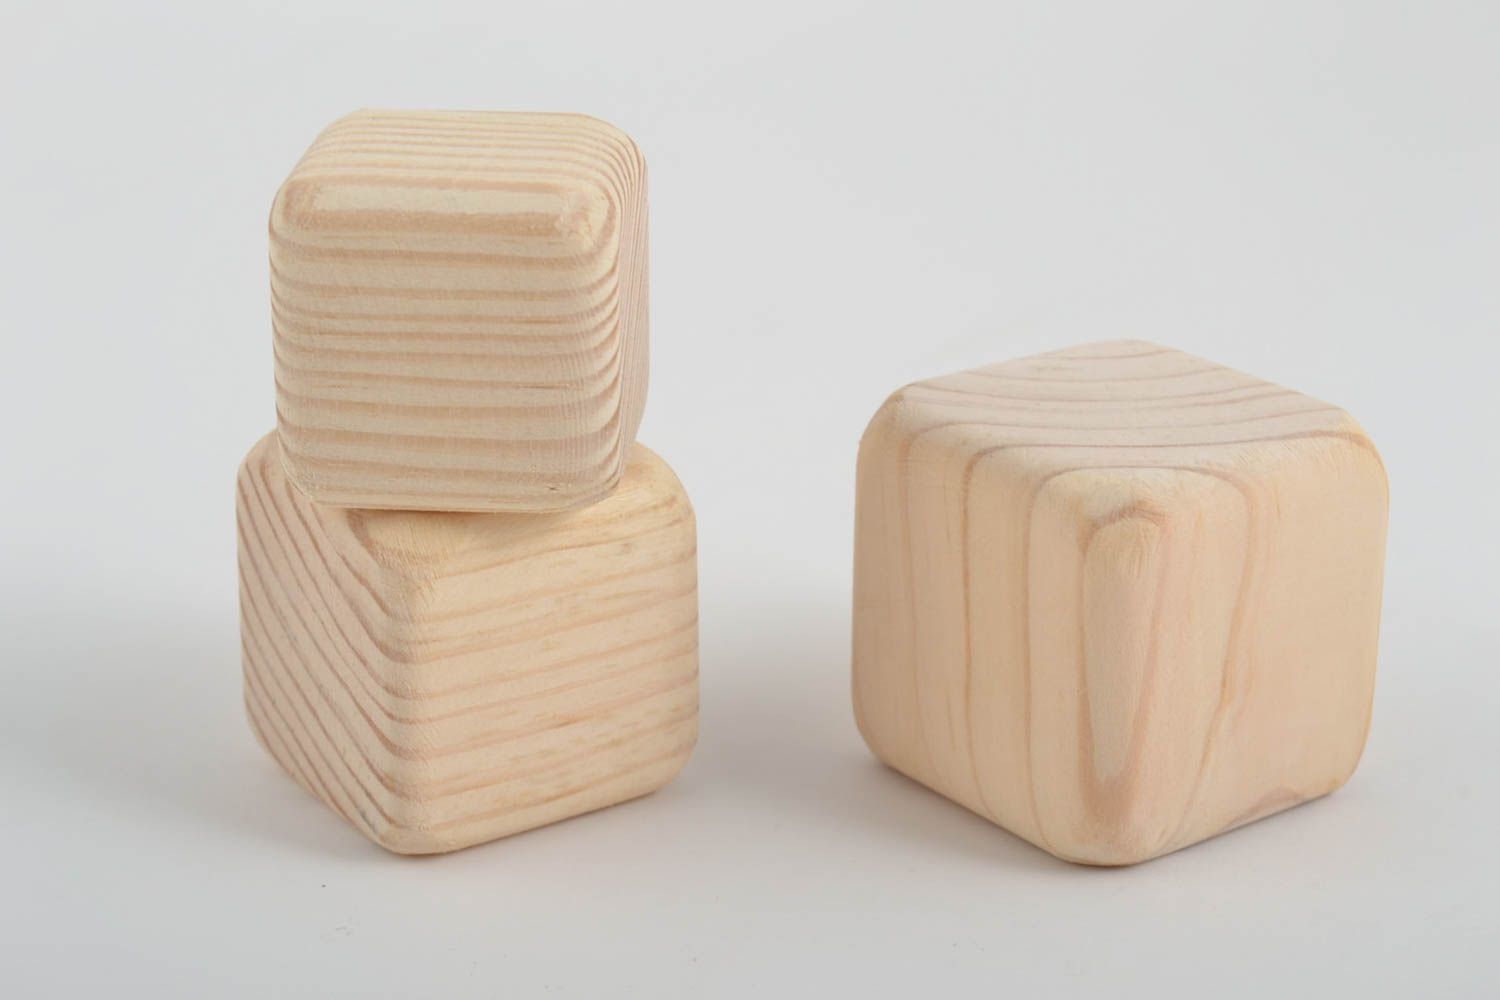 Set of 3 handmade wooden cubes wooden blocks educational toys for kids photo 3